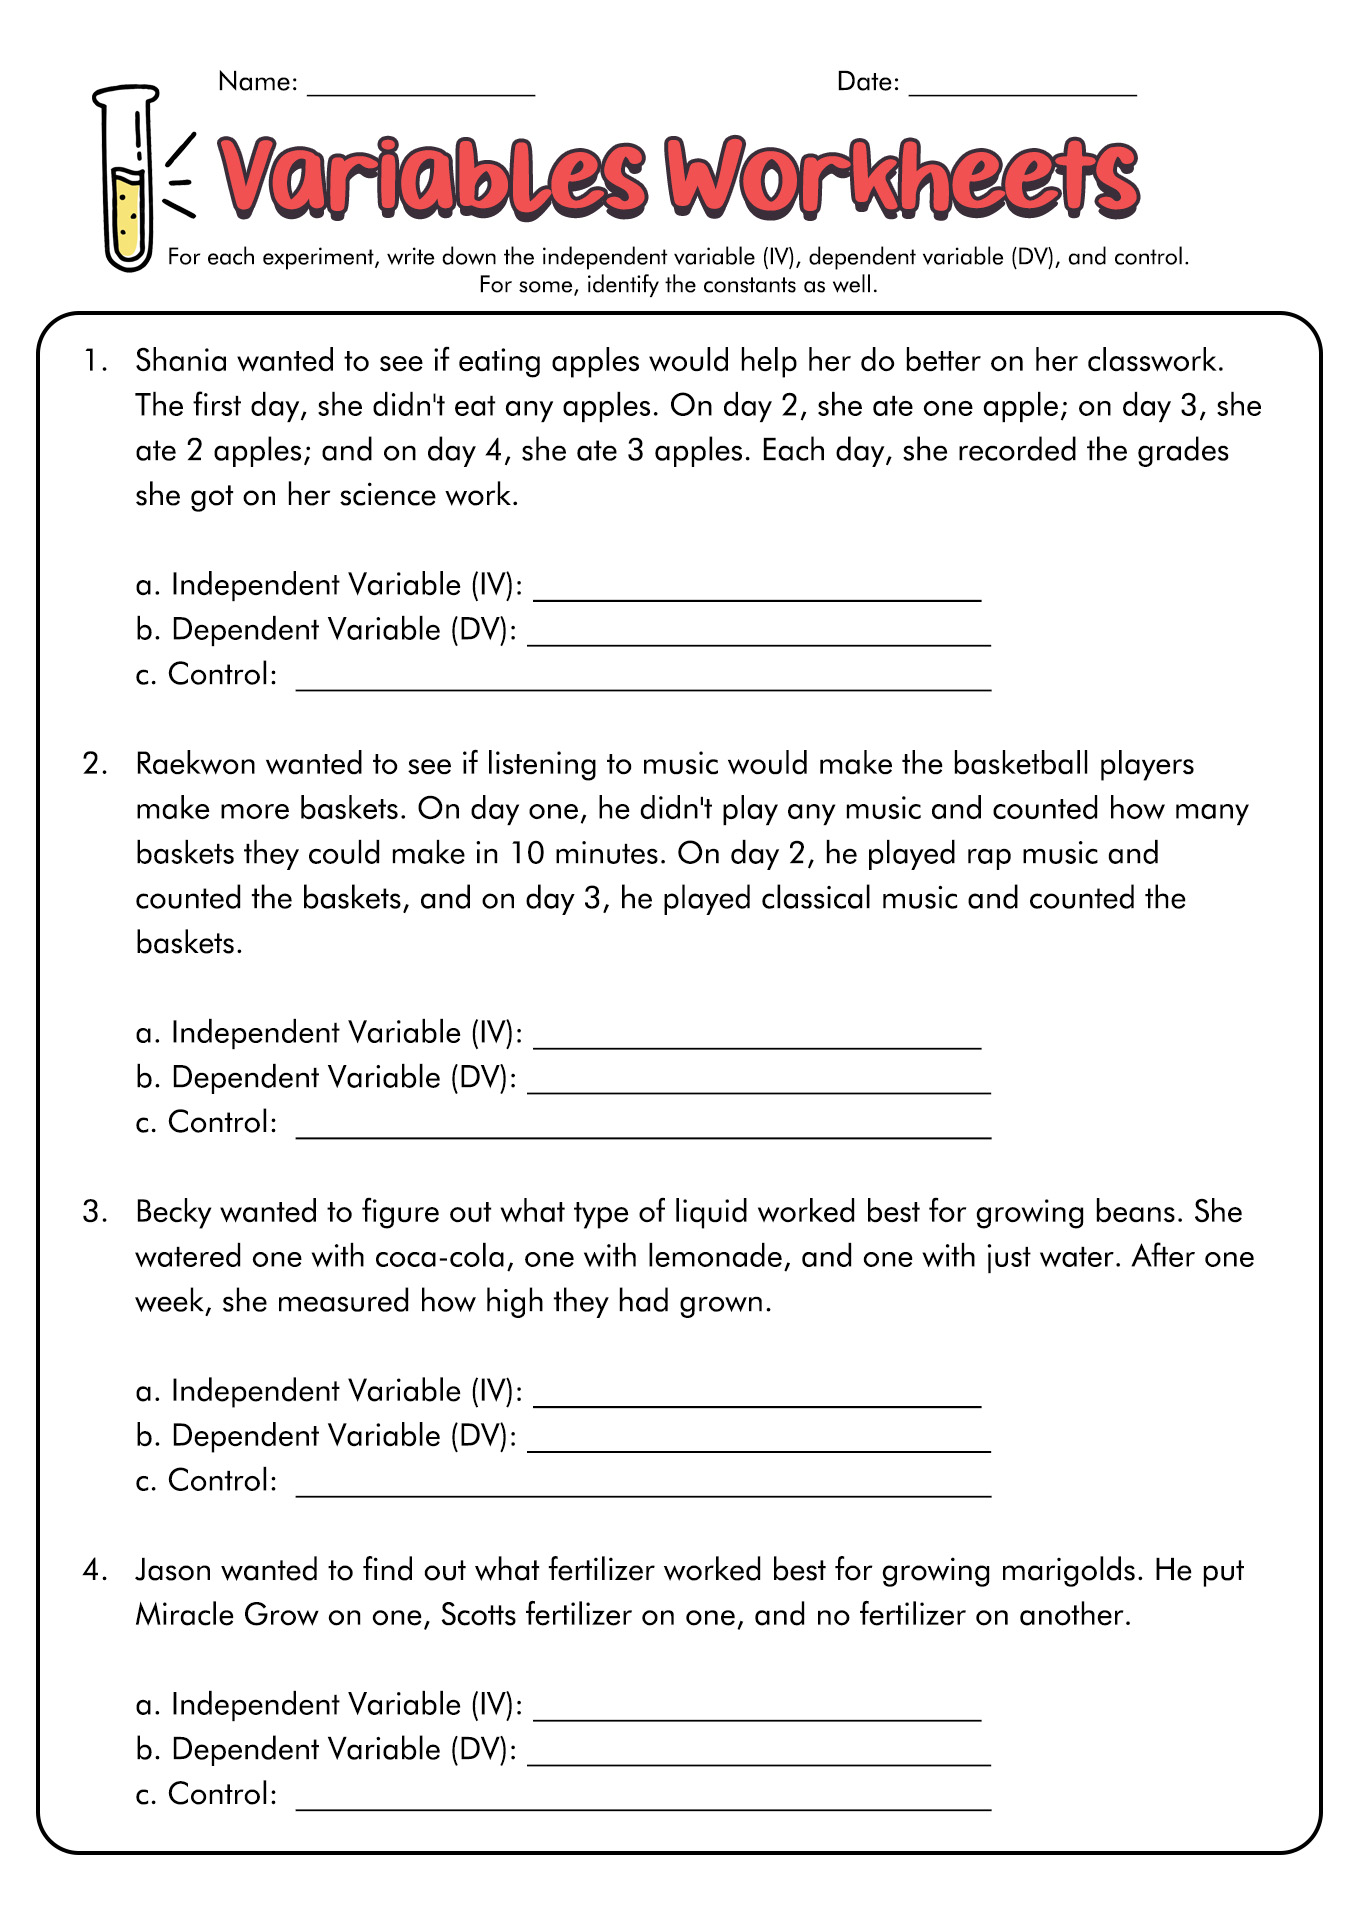 Independent and Dependent Variables Worksheet Science Image